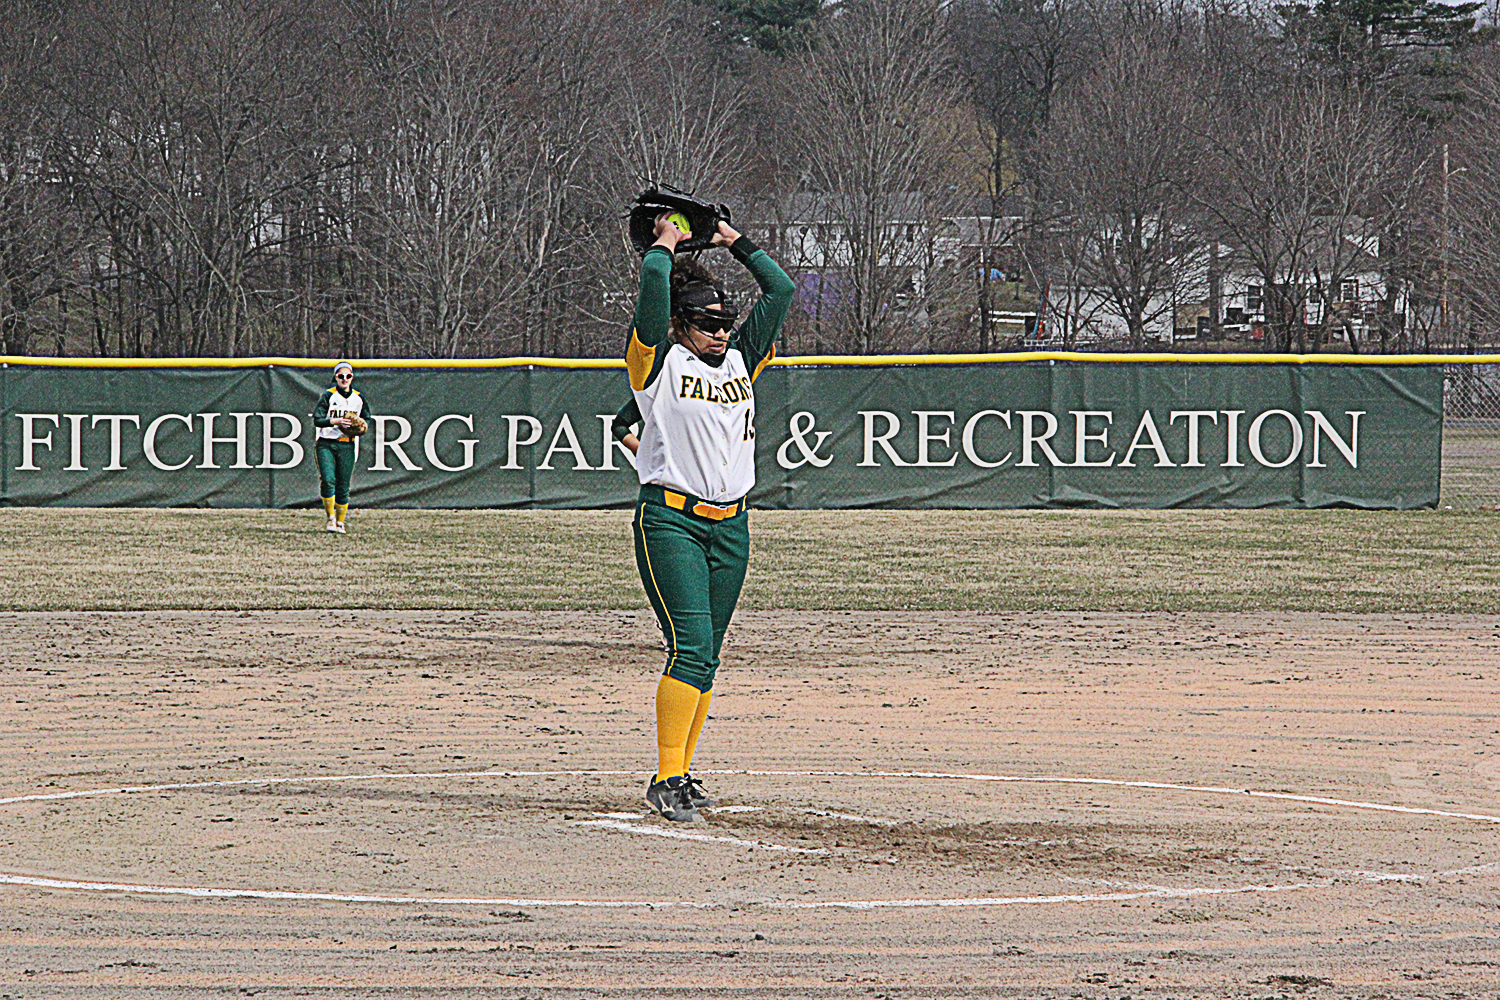 Fitchburg State Splits With Regis, 1-0/6-3